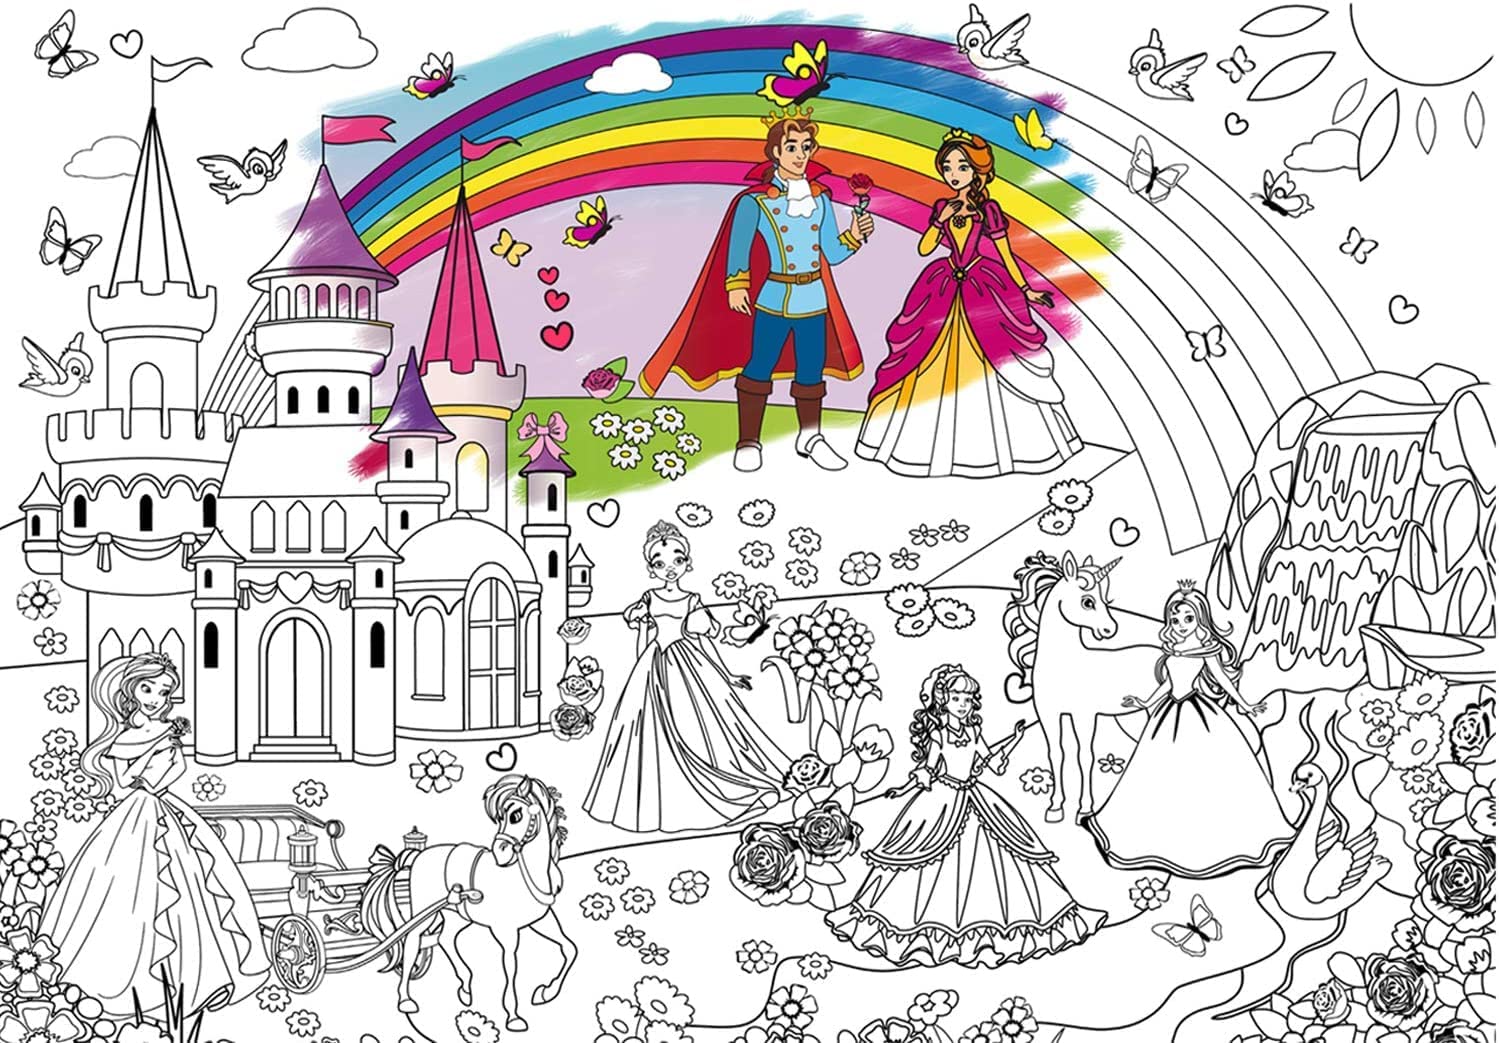 Coloring poster for children, the prince, princess and palace